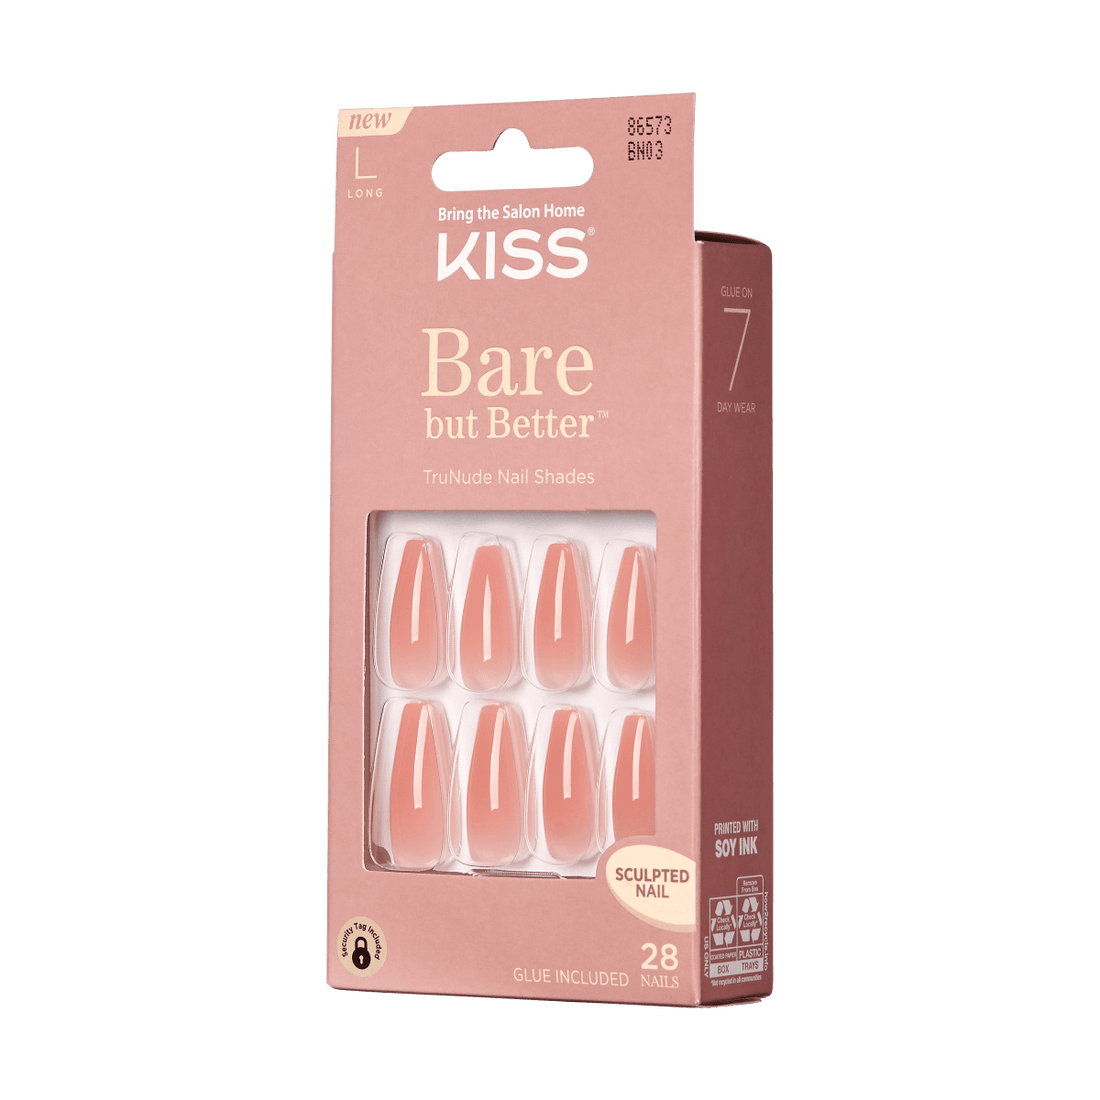 KISS Bare but Better Nails - Nude Glow